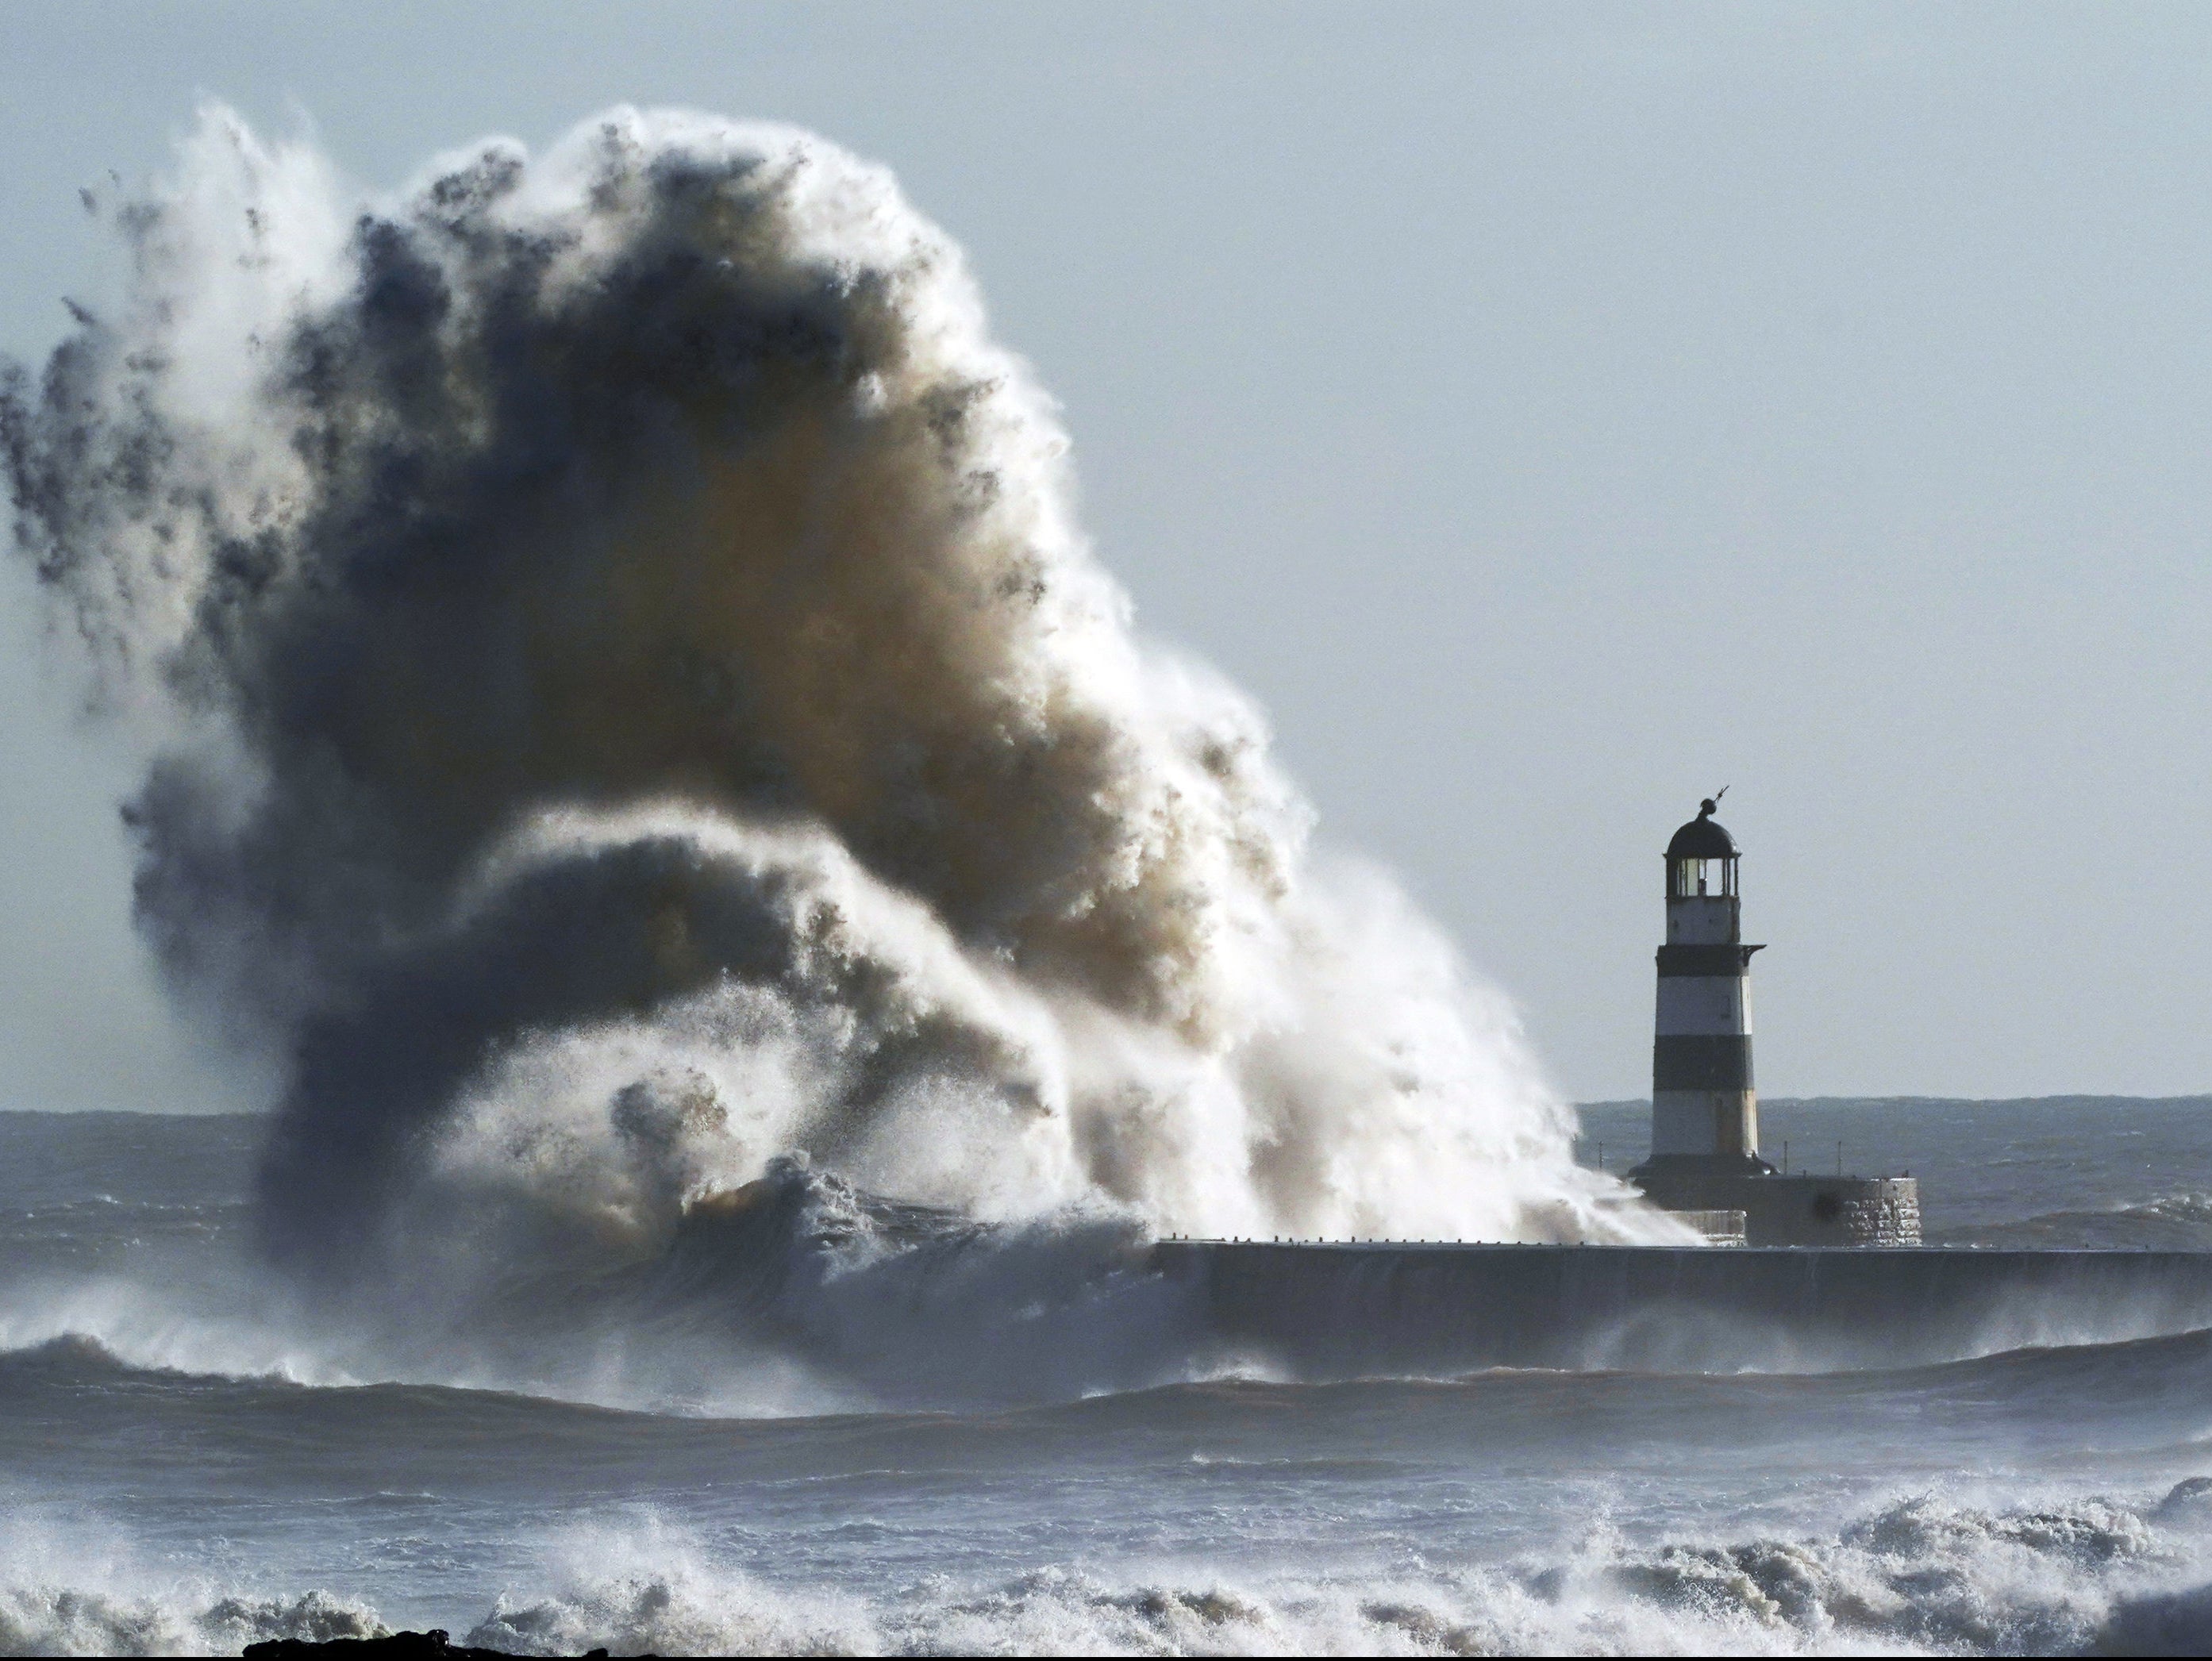 Storm Corrie battered parts of the UK on Monday